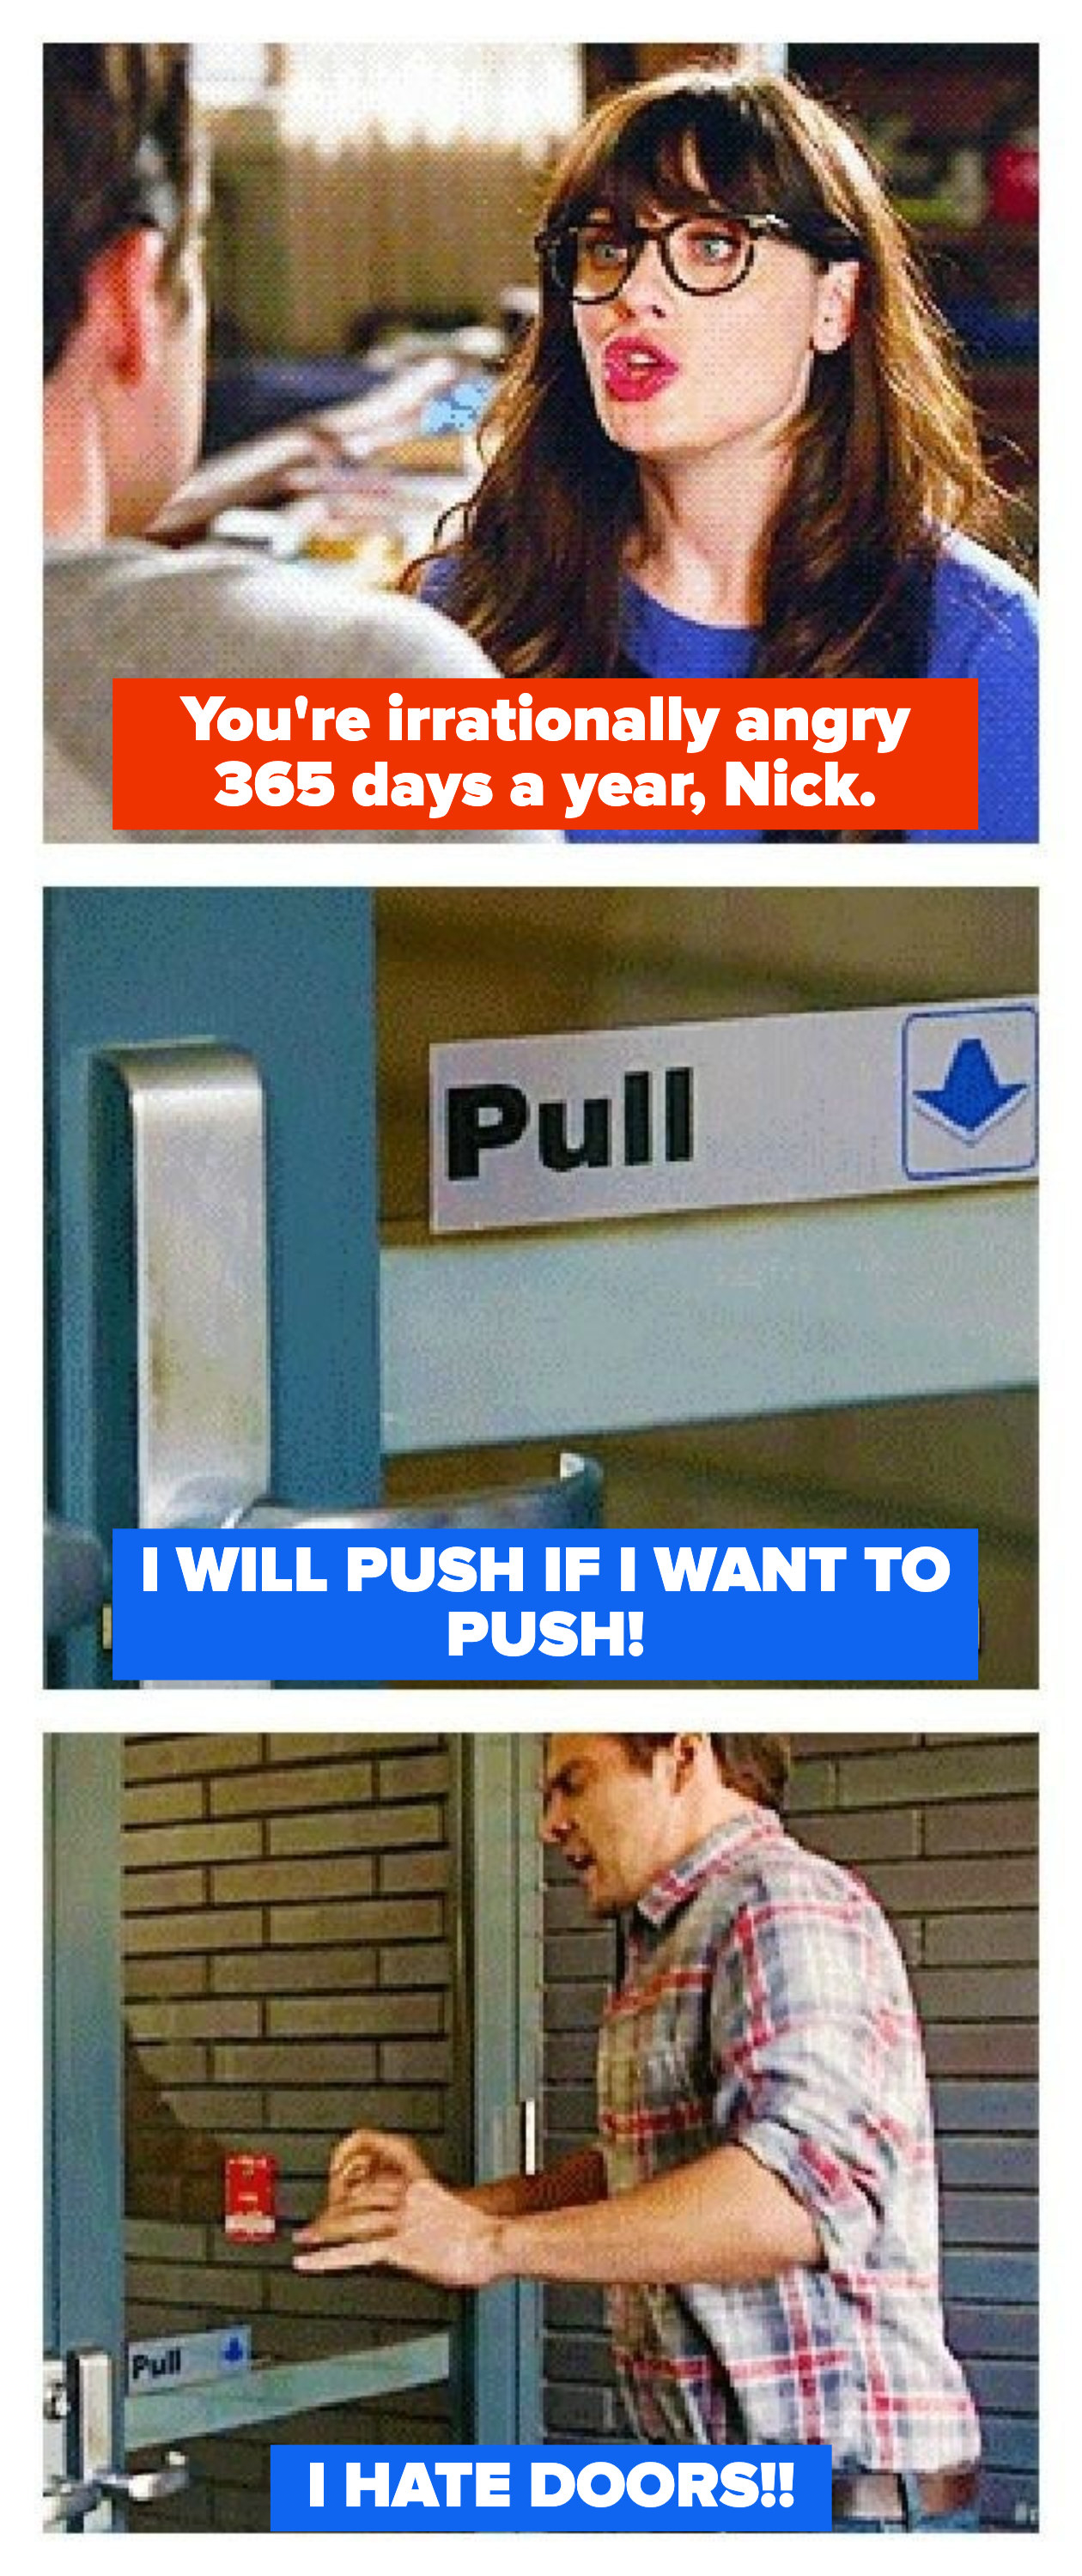 Jess says Nick is angry 365 days a year. There&#x27;s a flashback to Nick getting mad at a door